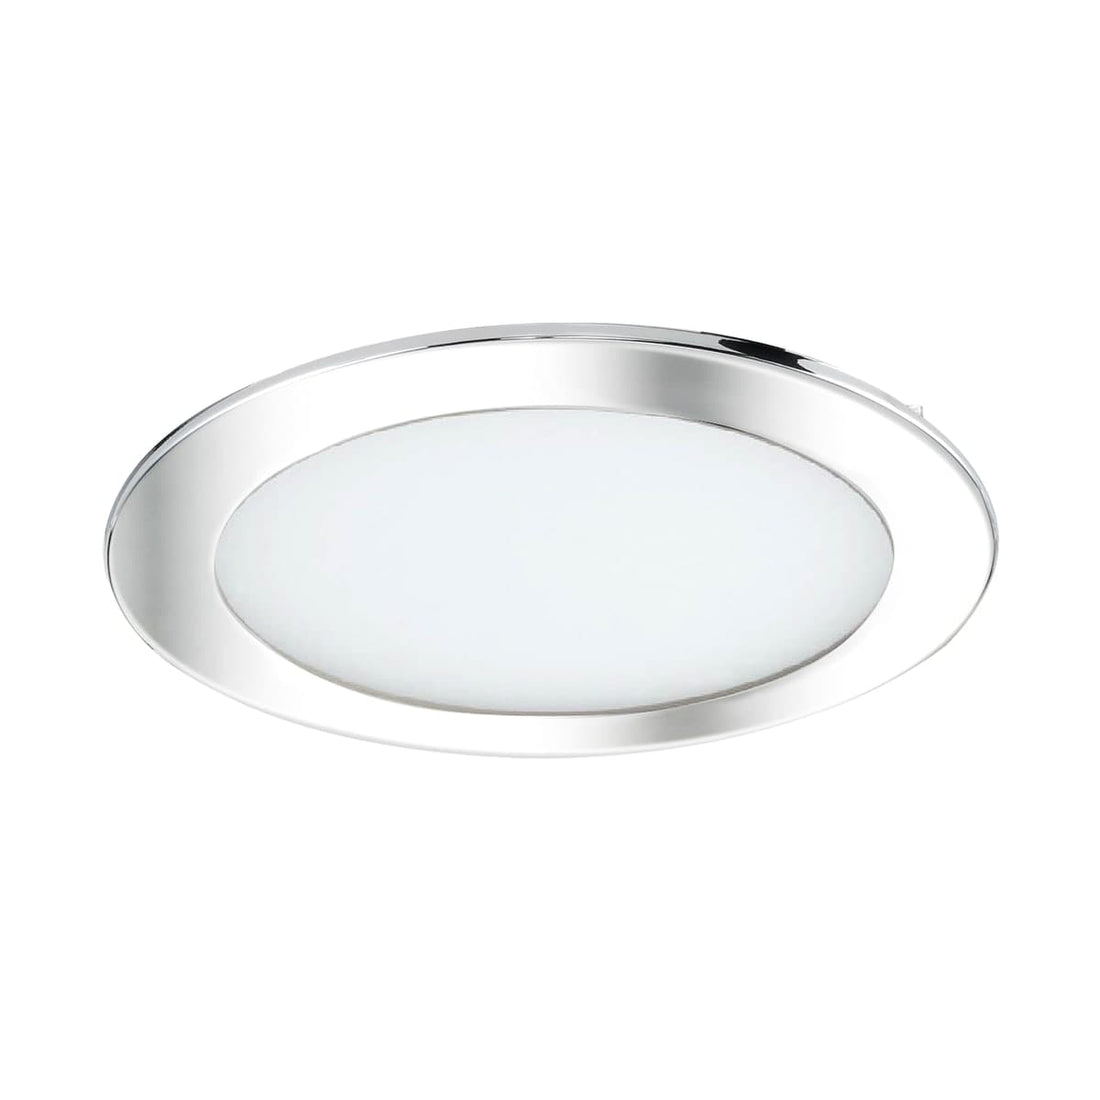 RECESSED SPOTLIGHT BATH ALUMINIUM SILVER D20.5 LED 25W WARM AND NATURAL LIGHT DIMMABLE IP44 - best price from Maltashopper.com BR420003742